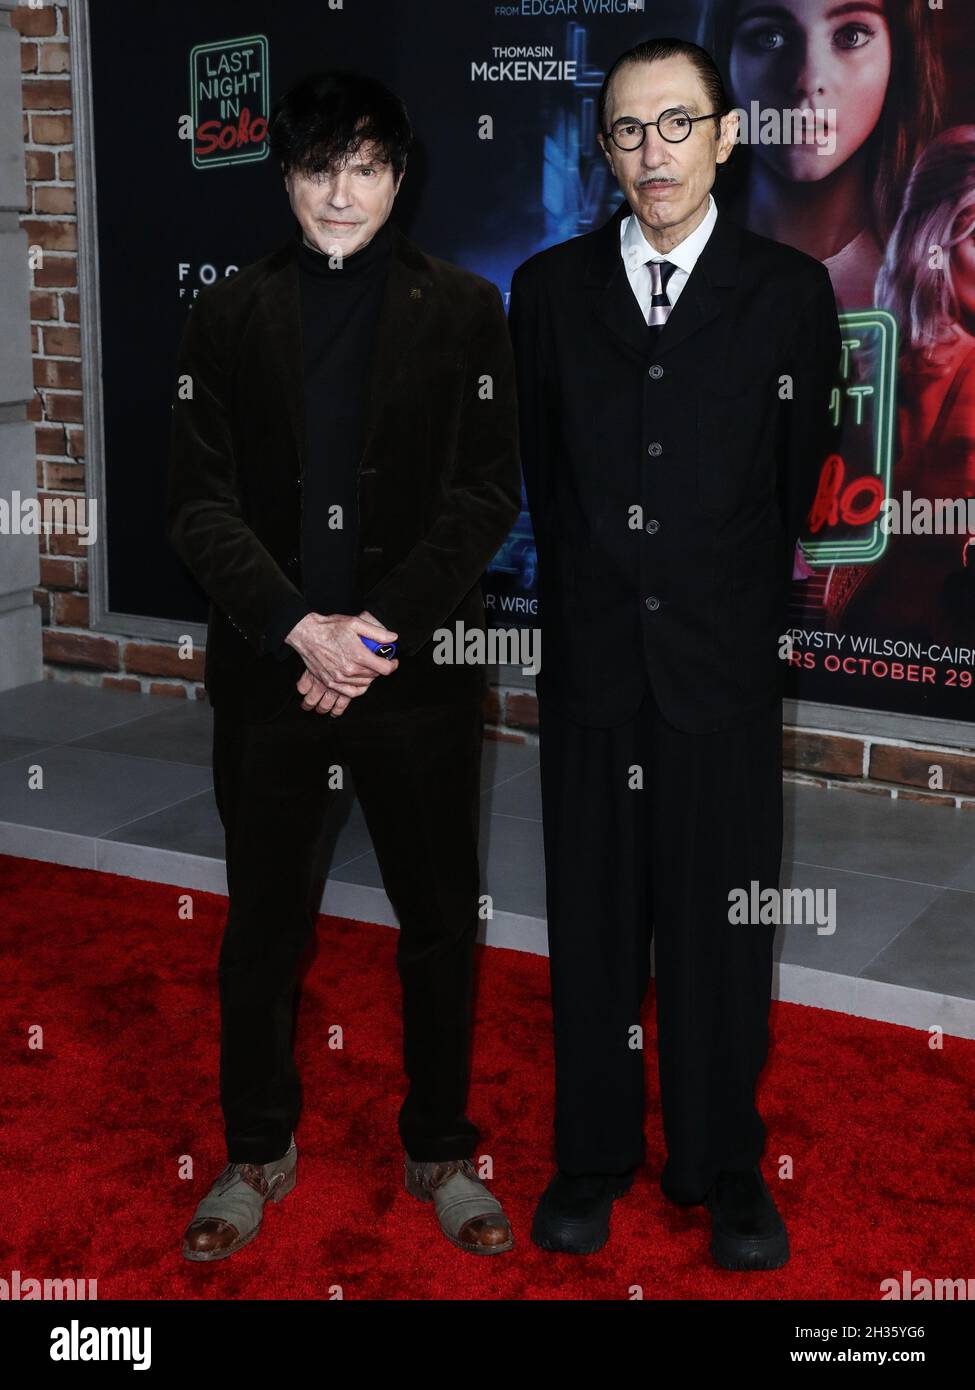 Los Angeles, United States. 25th Oct, 2021. LOS ANGELES, CALIFORNIA, USA - OCTOBER 25: Singer Russell Mael and brother/musician Ron Mael of Sparks arrive at the Los Angeles Premiere Of Focus Features' 'Last Night In Soho' held at the Academy Museum of Motion Pictures on October 25, 2021 in Los Angeles, California, United States. (Photo by Xavier Collin/Image Press Agency) Credit: Image Press Agency/Alamy Live News Stock Photo